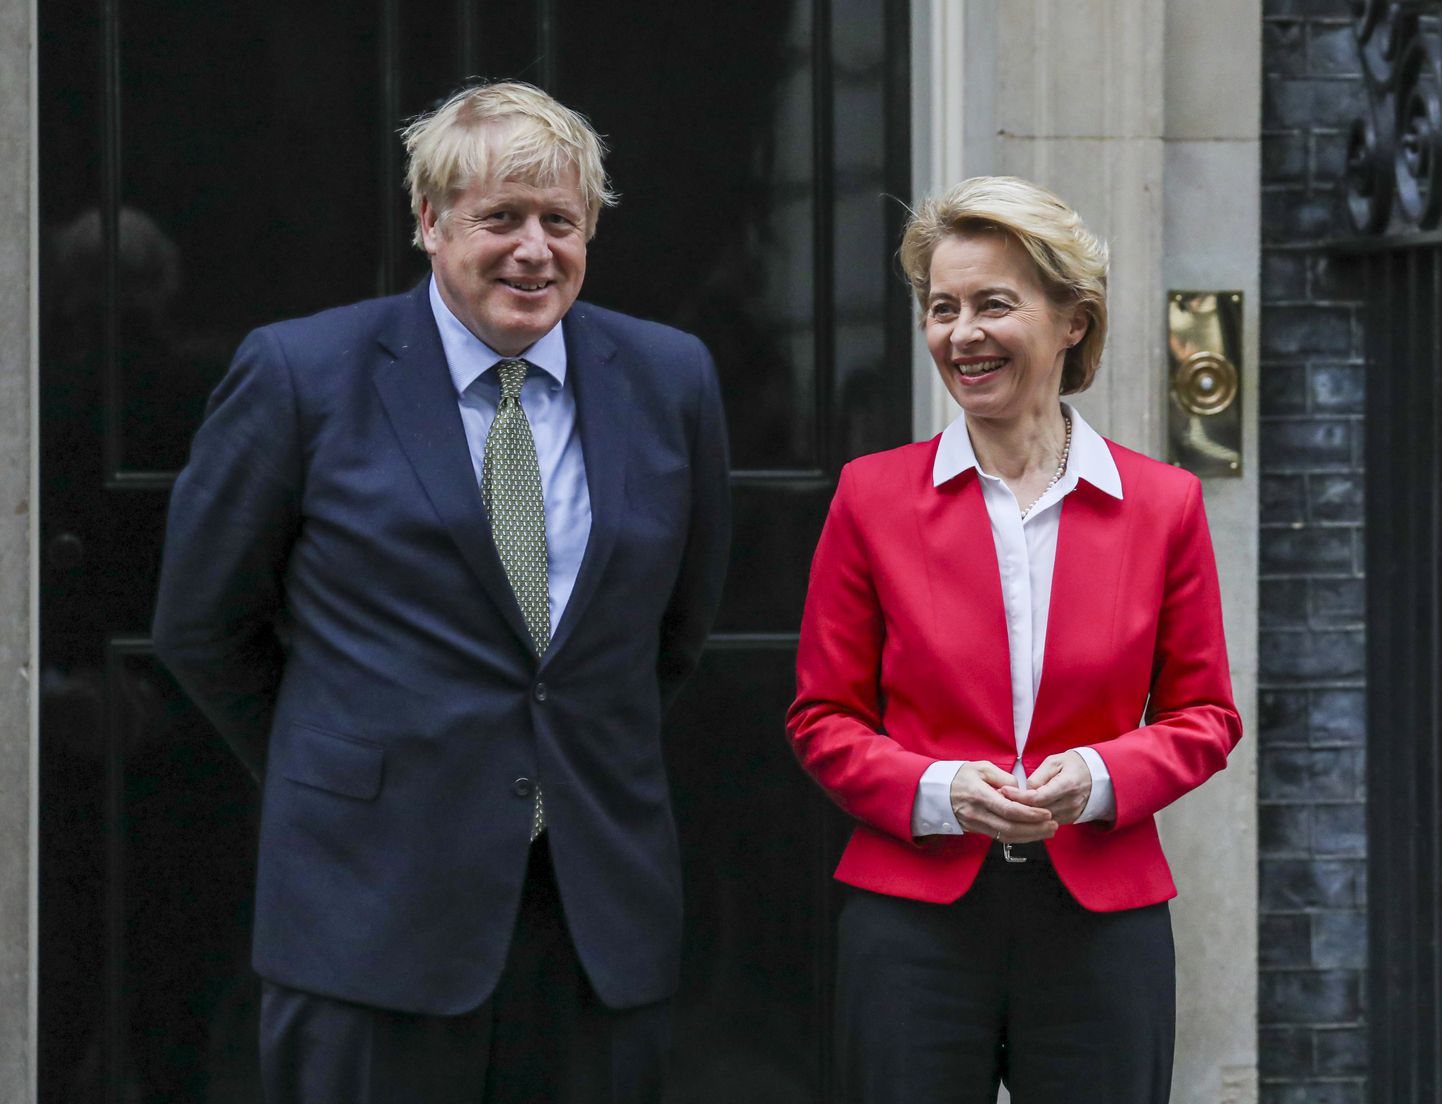 January 8, 2020, London, London, UK: London, UK. Prime Minister Boris Johnson welcomes the President of the European Commission, Ursula von der Leyen, on the steps of NO10 Downing Street this afternoon as he insists the Brexit transition will not extended past December. (Credit Image: © Alex Lentati/London News Pictures via ZUMA Wire)